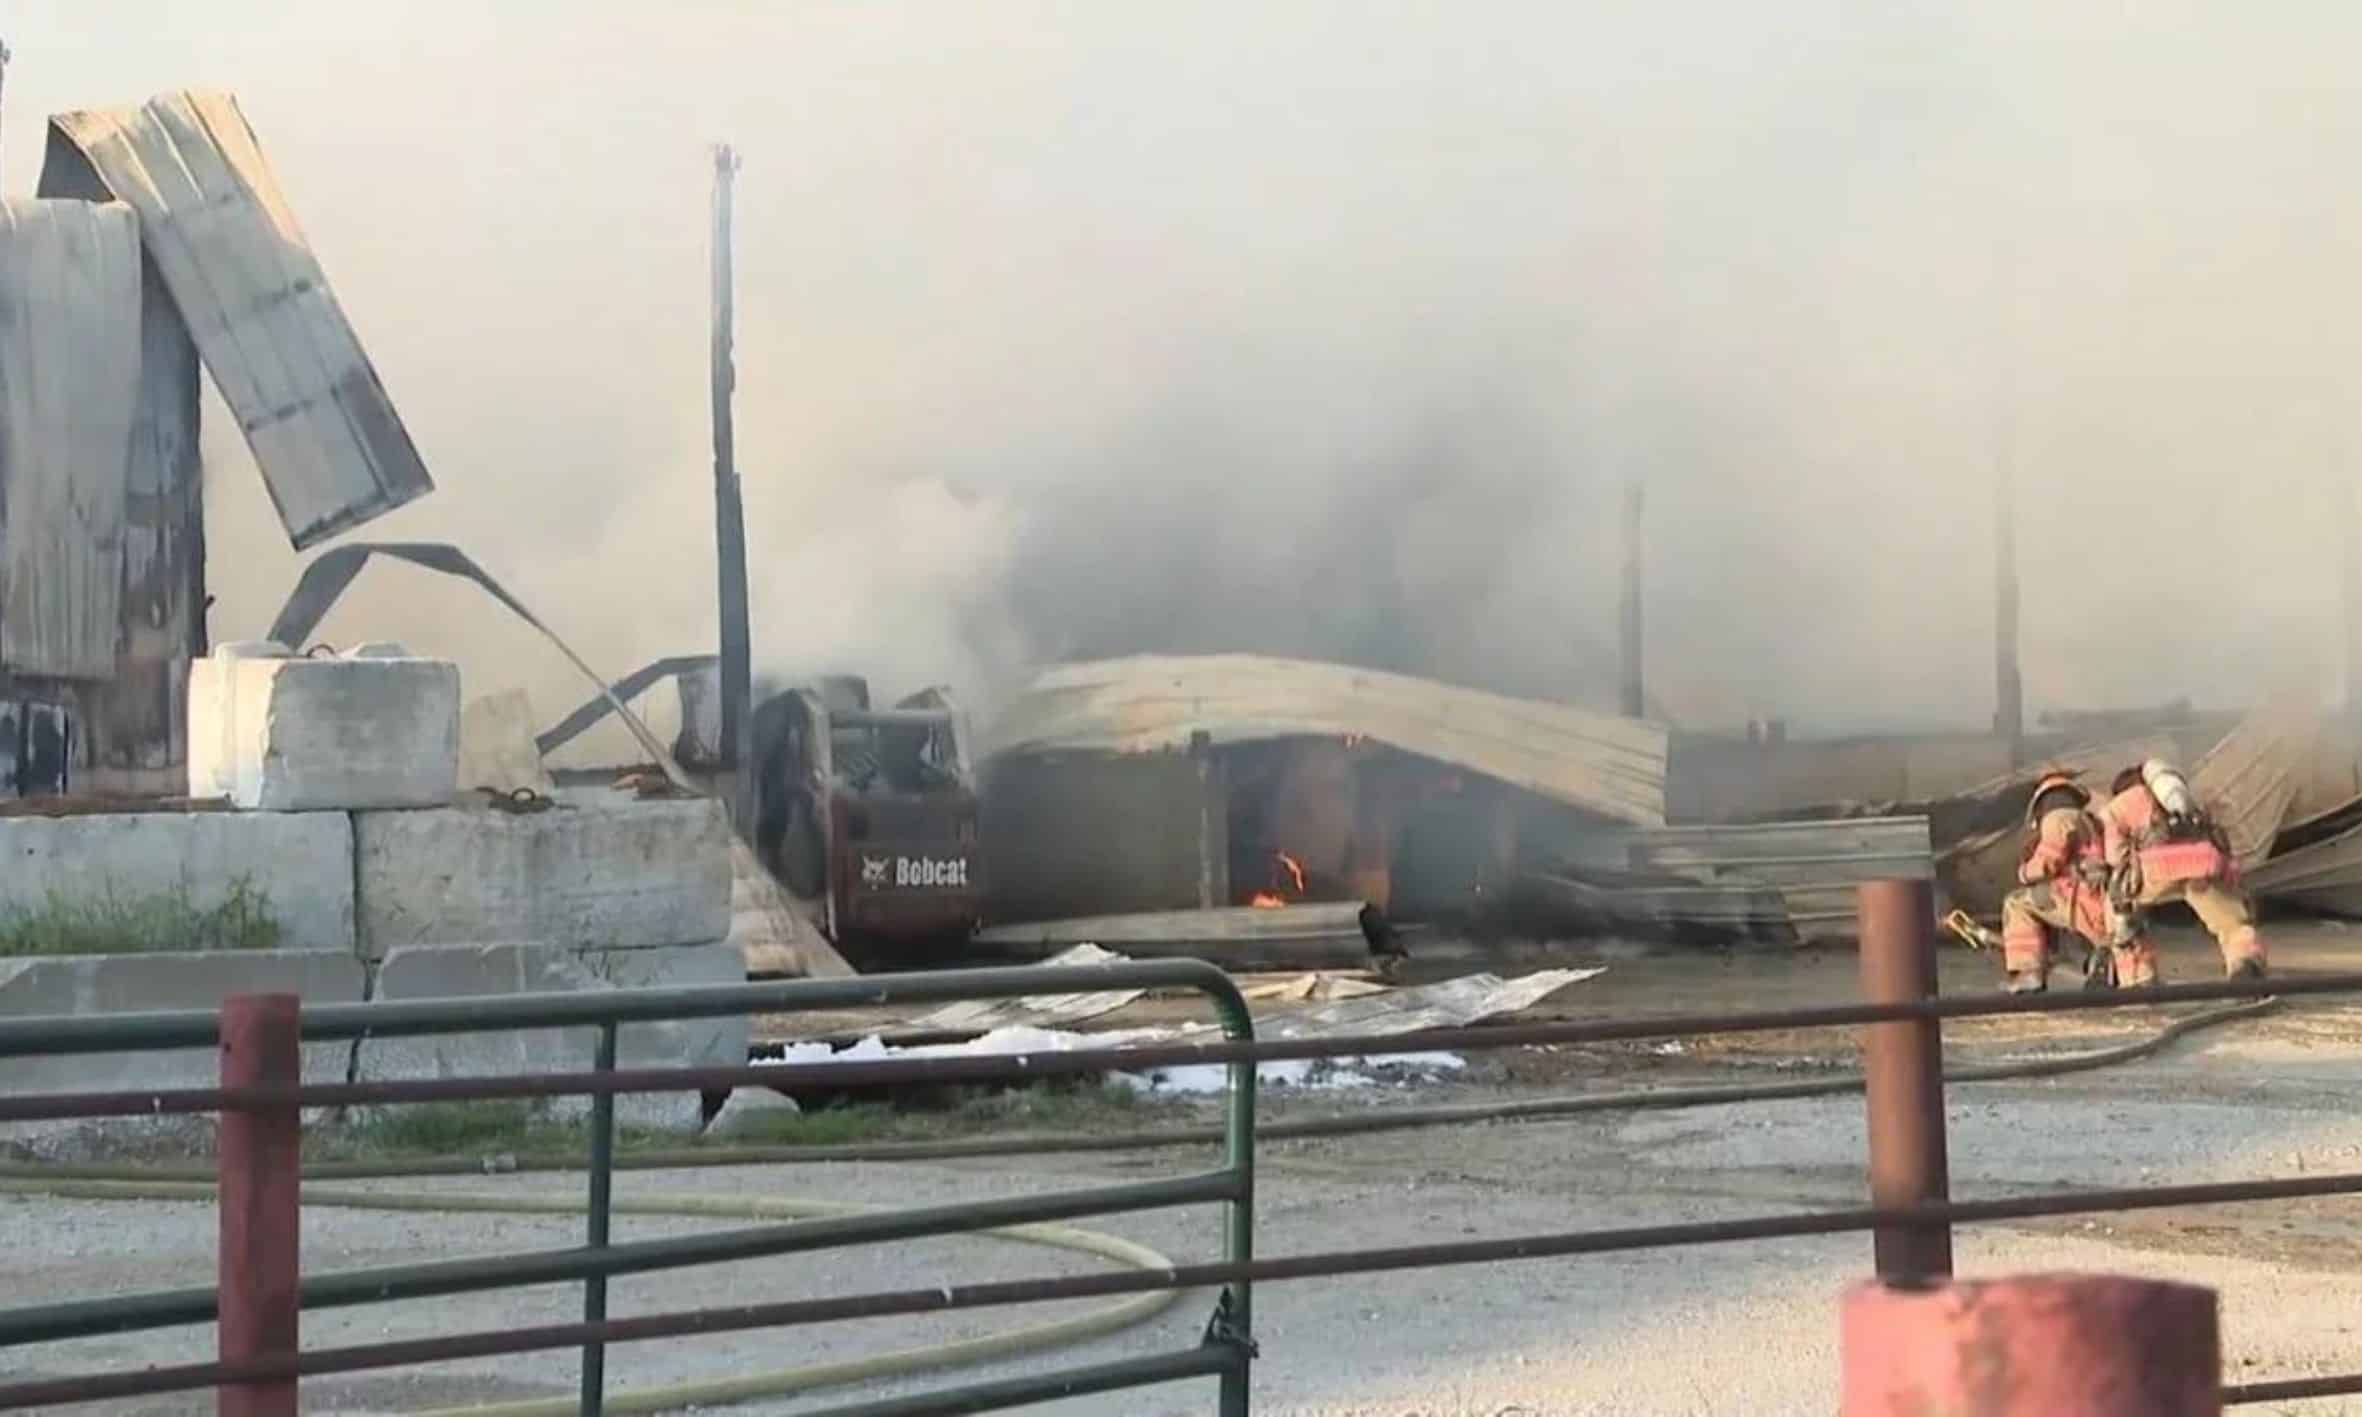 Barn on MU dairy farm considered total loss after fire